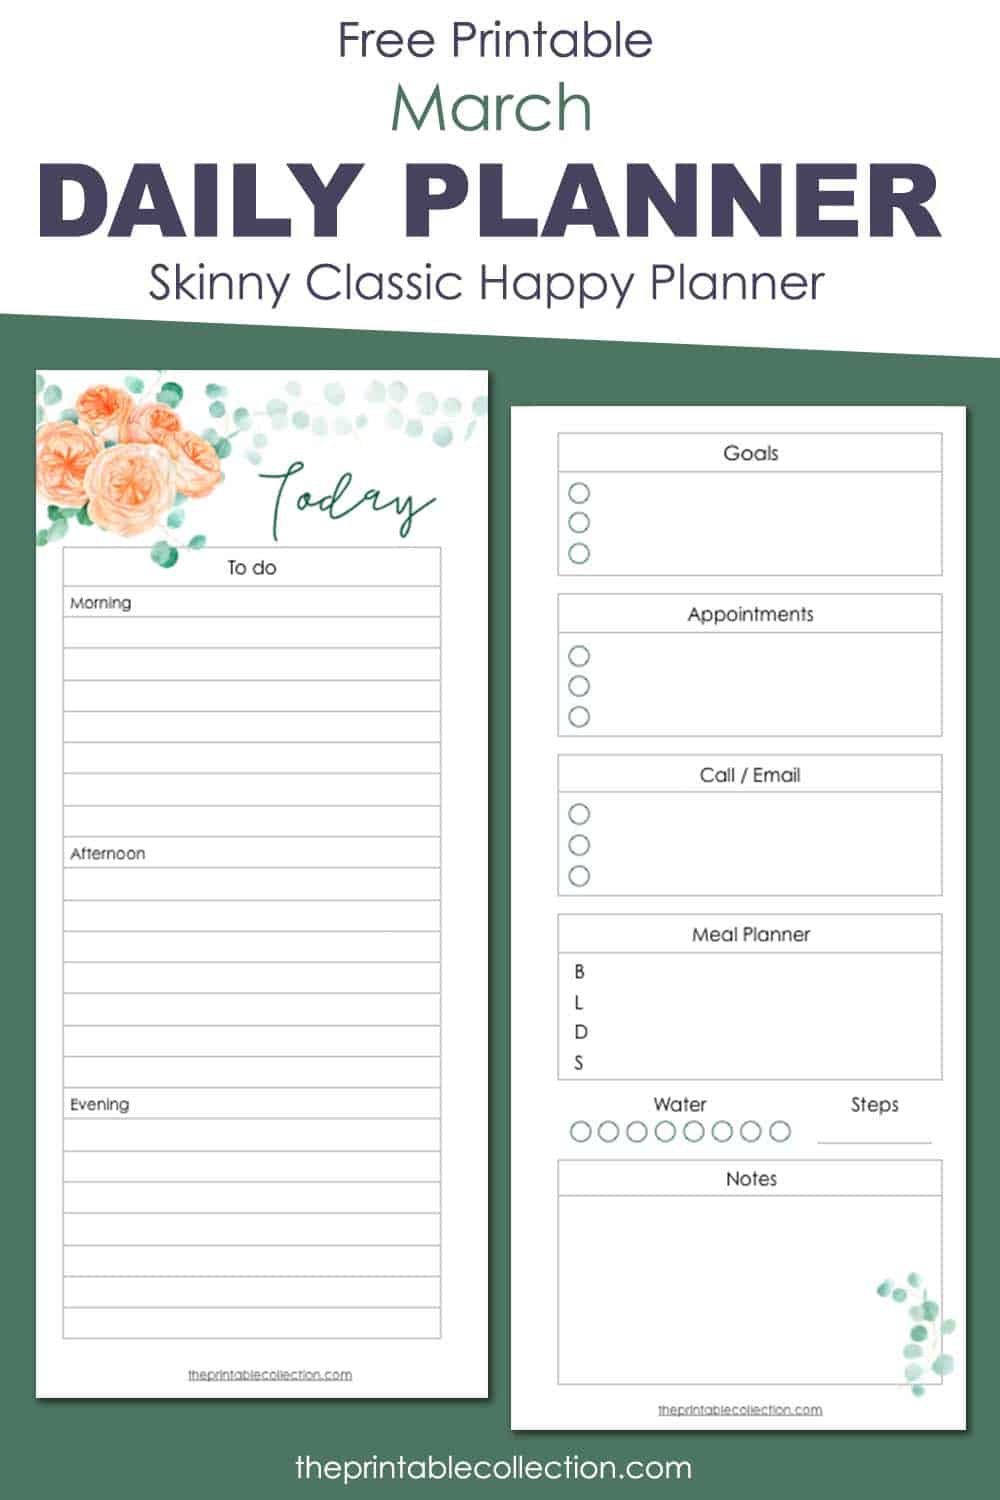 Printable Daily Planner Page For March | The Printable Collection